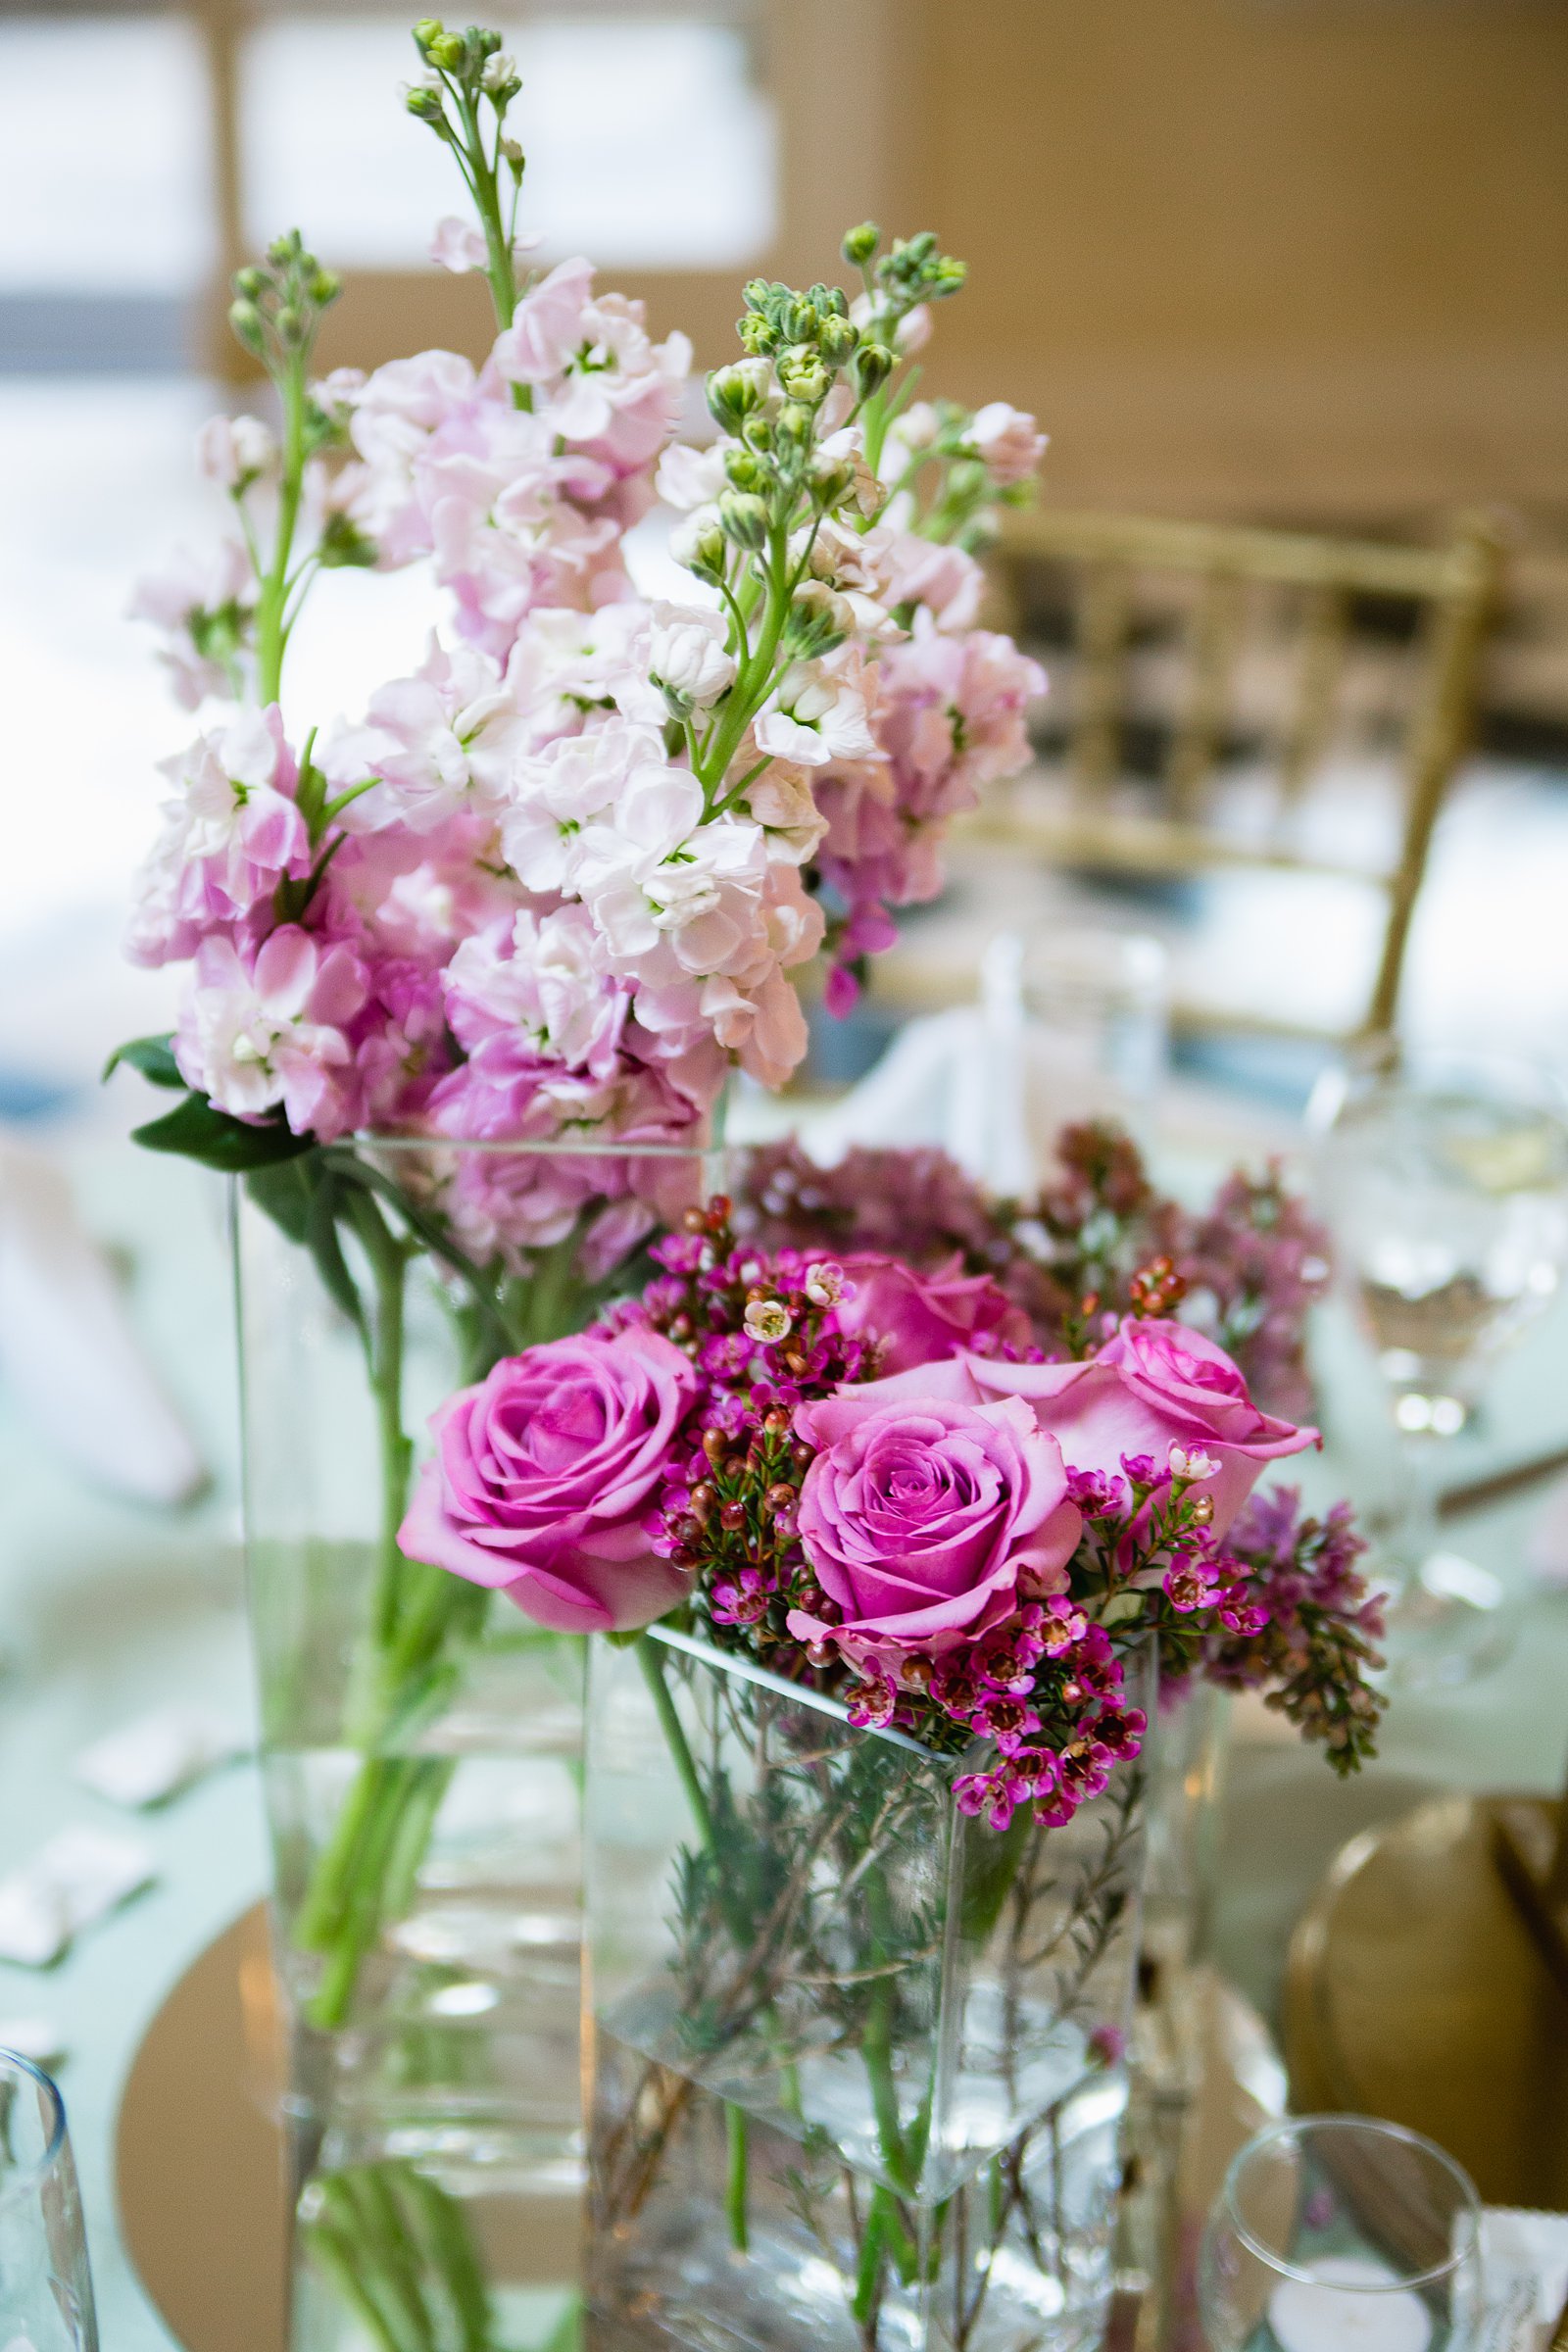 Simple purple garden inspired centerpieces at The Wright House wedding reception by Mesa wedding photographer PMA Photography.